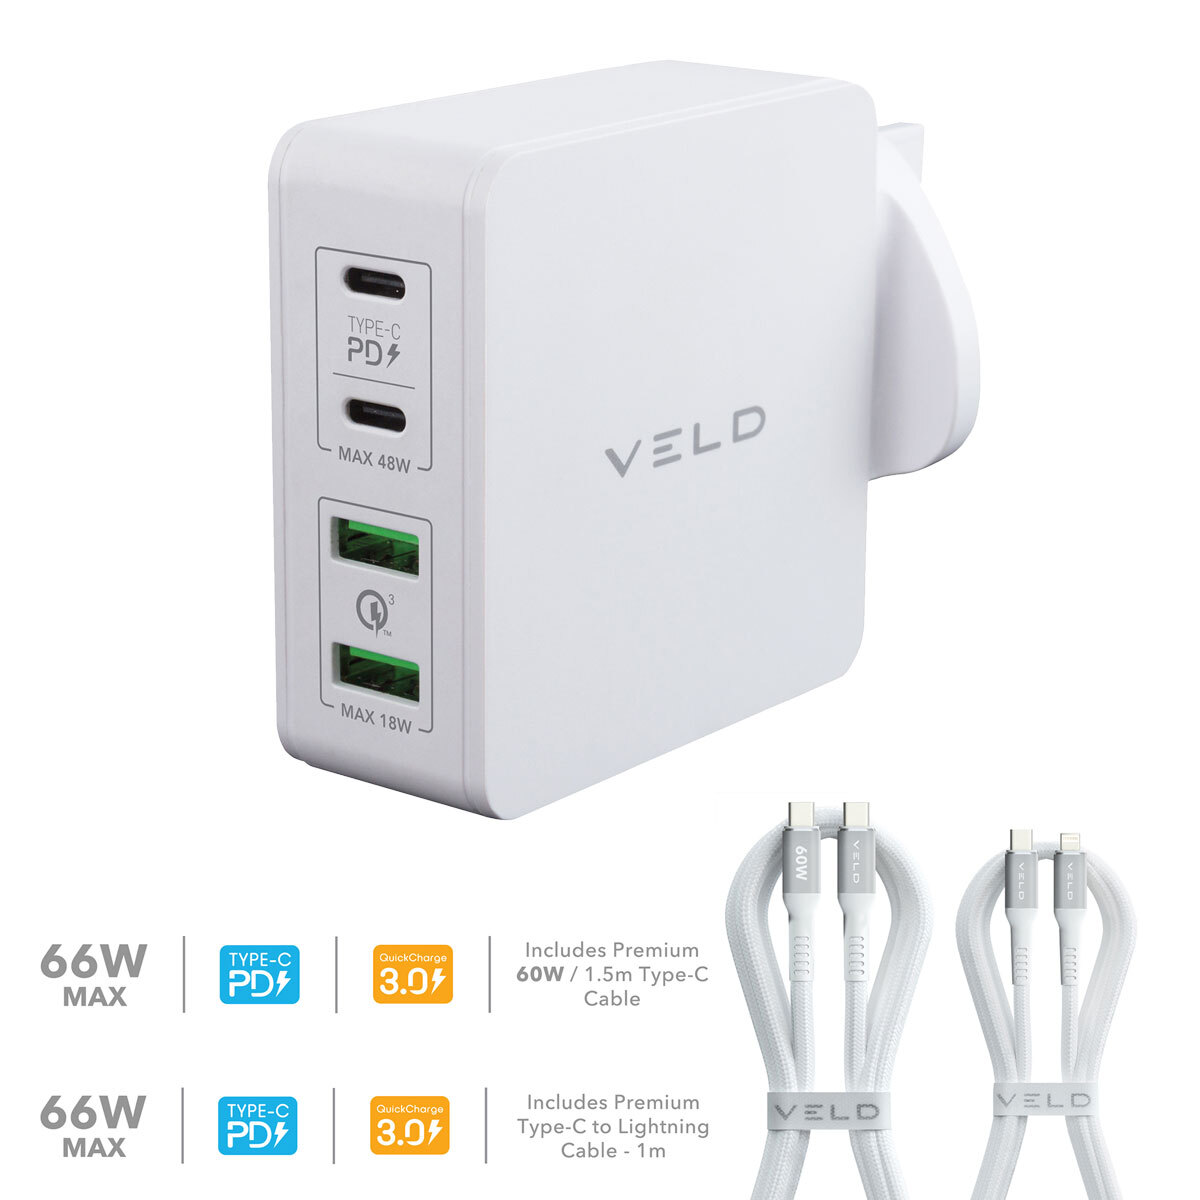 VELD Super-Fast Max 66W 4 Port Wall Charger with Lightning or Type-C Cable